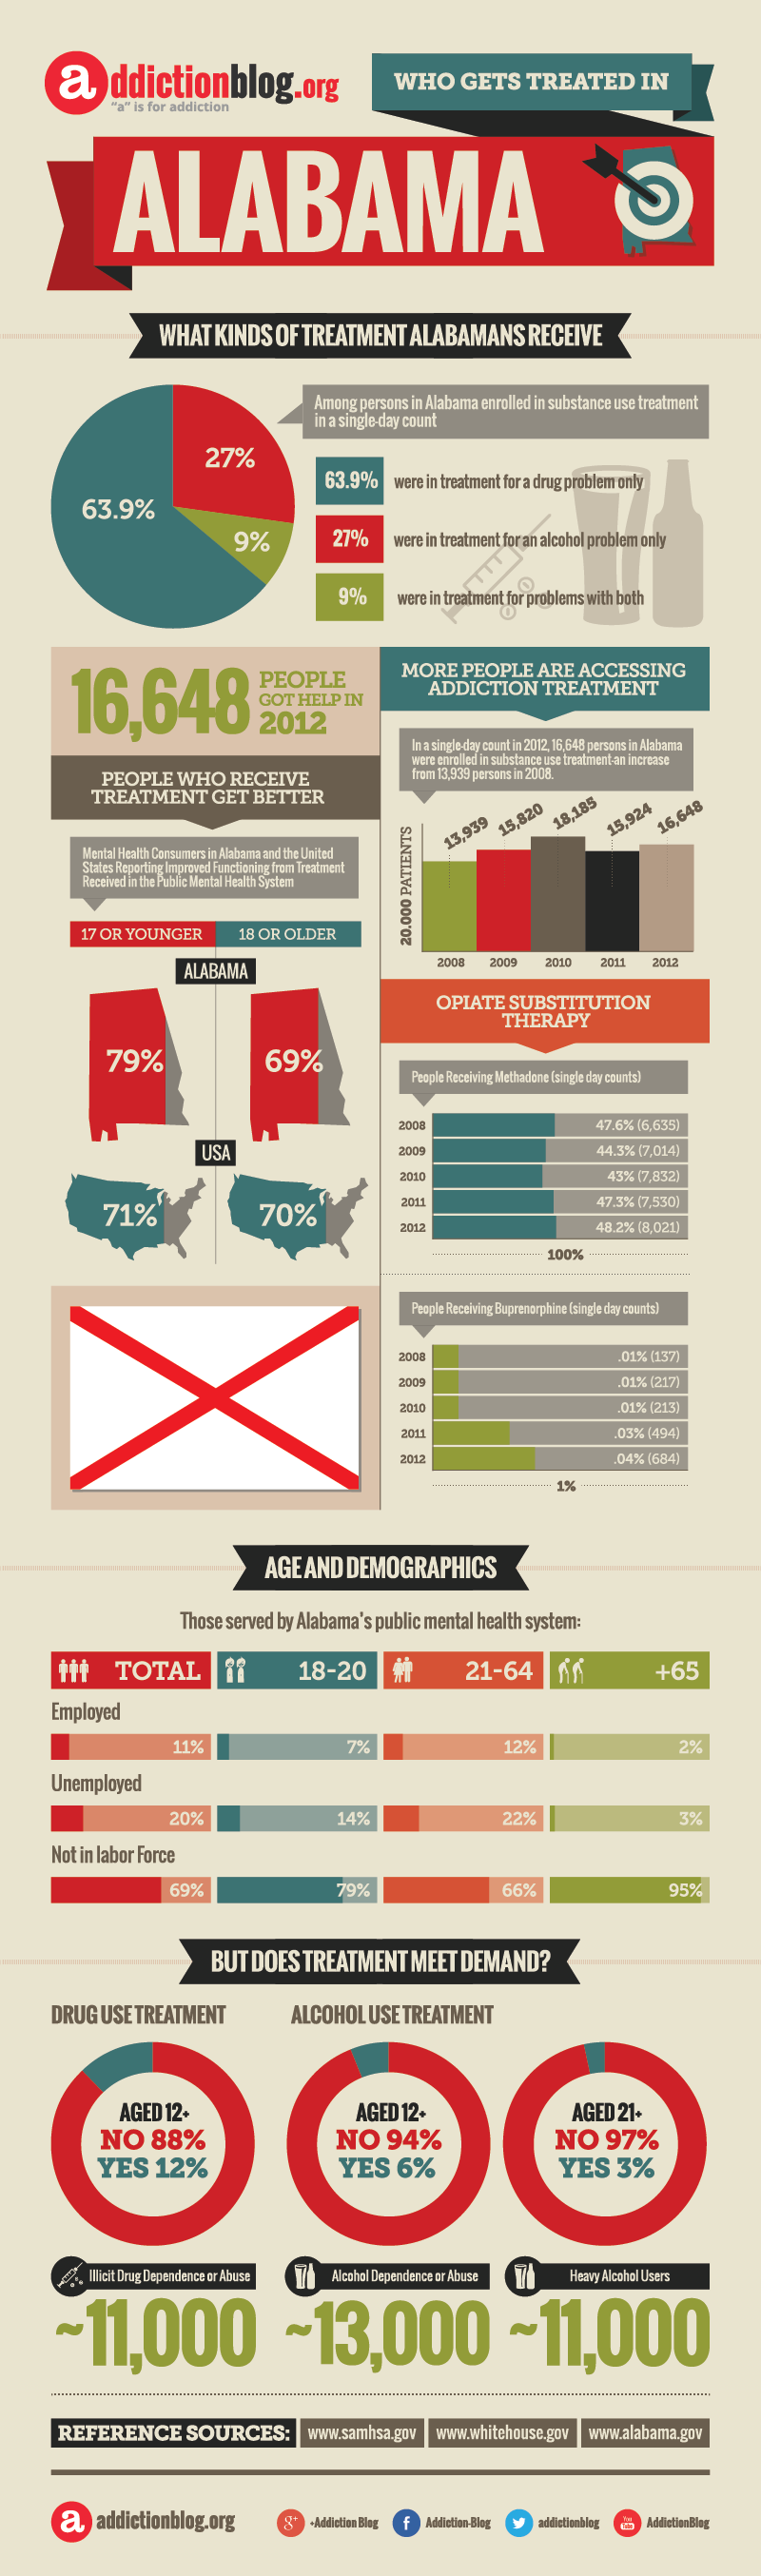 Alabama rehab: Who’s getting treated? (INFOGRAPHIC)